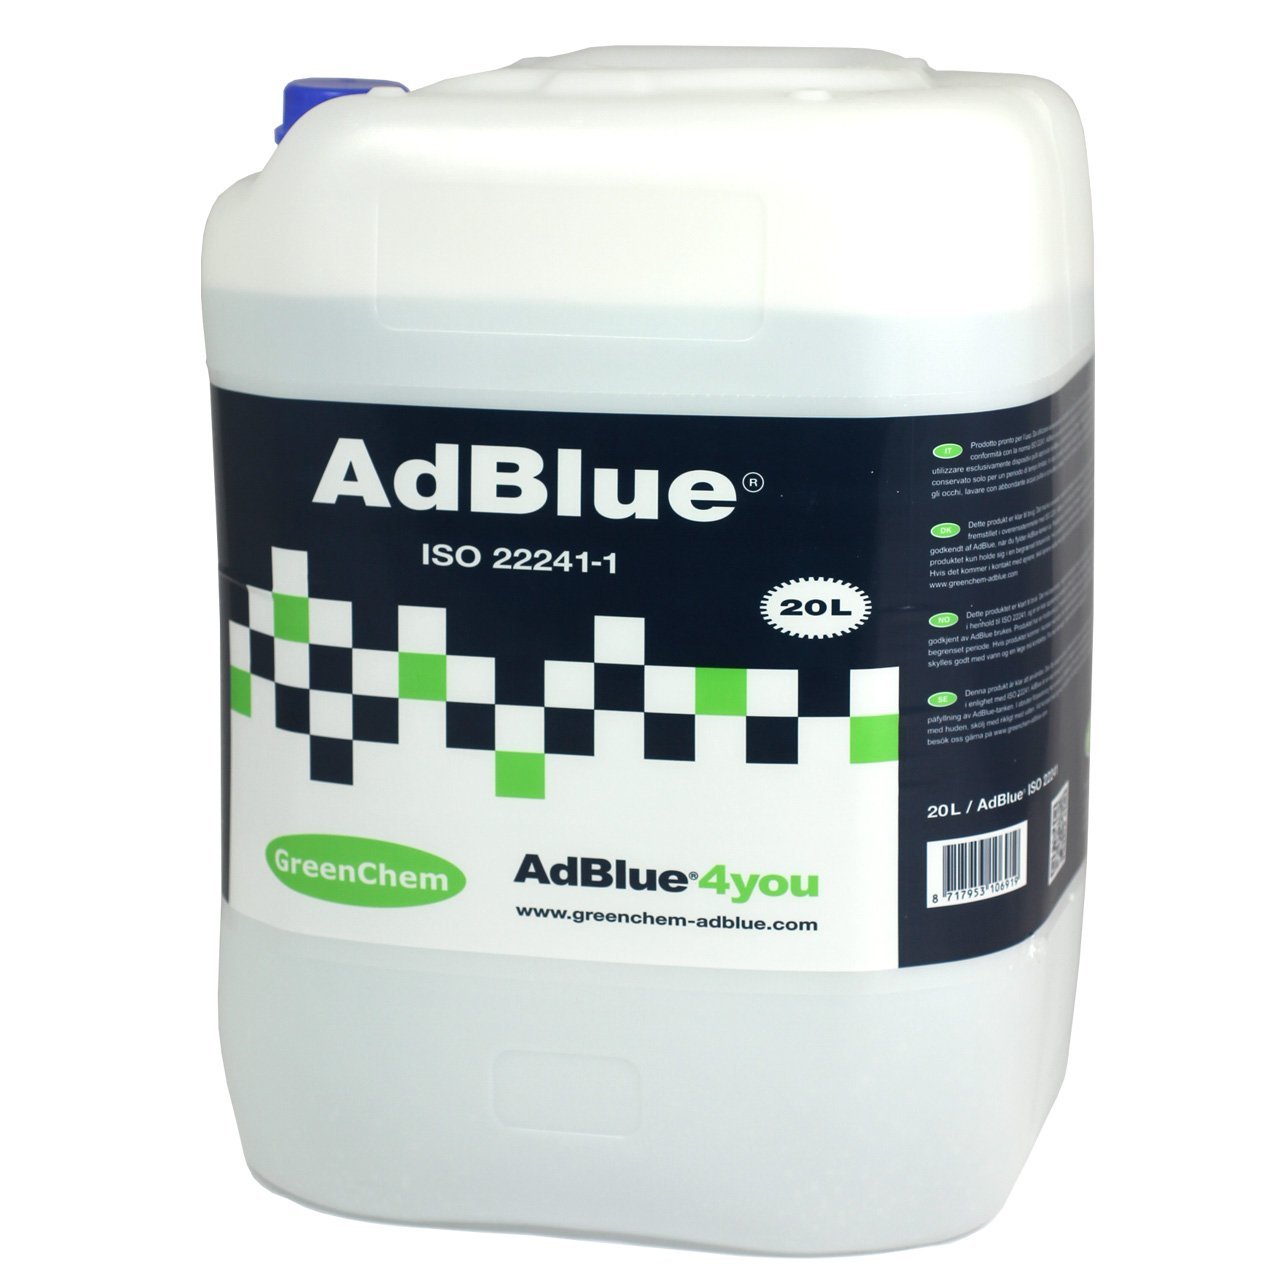 AdBlue Diesel Exhaust Treatment for selective Catalytic Reduction (SCR)  Technology 20ltr(inc vat and delivery)